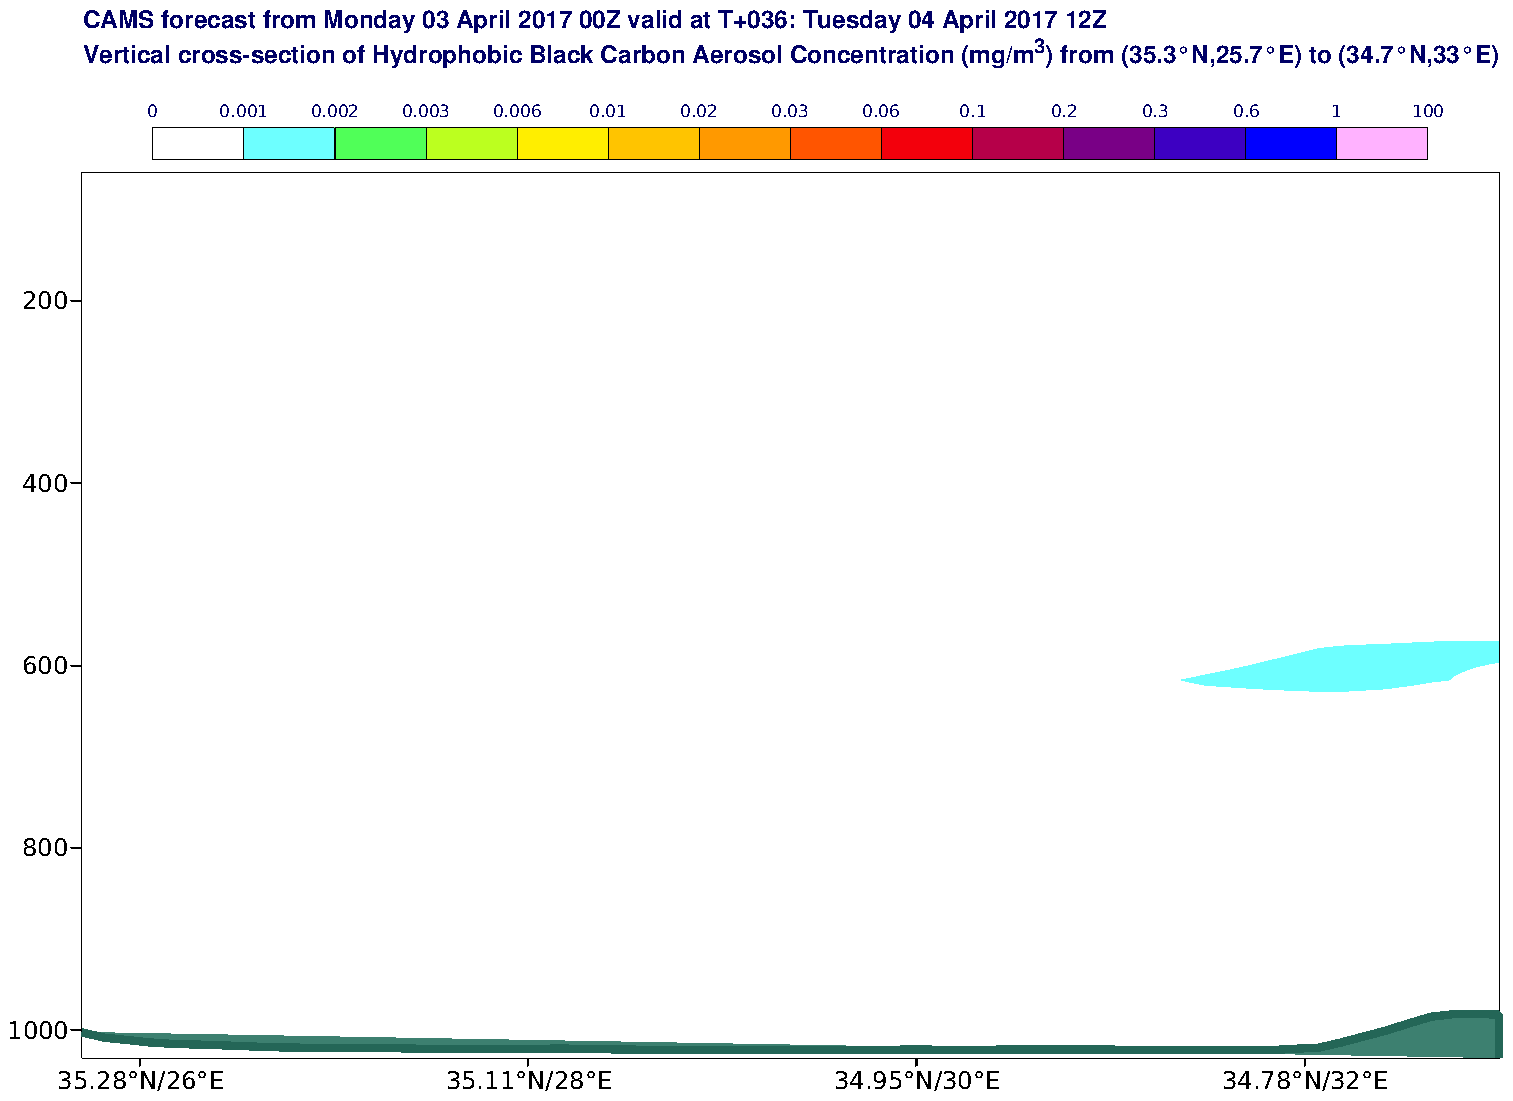 Vertical cross-section of Hydrophobic Black Carbon Aerosol Concentration (mg/m3) valid at T36 - 2017-04-04 12:00